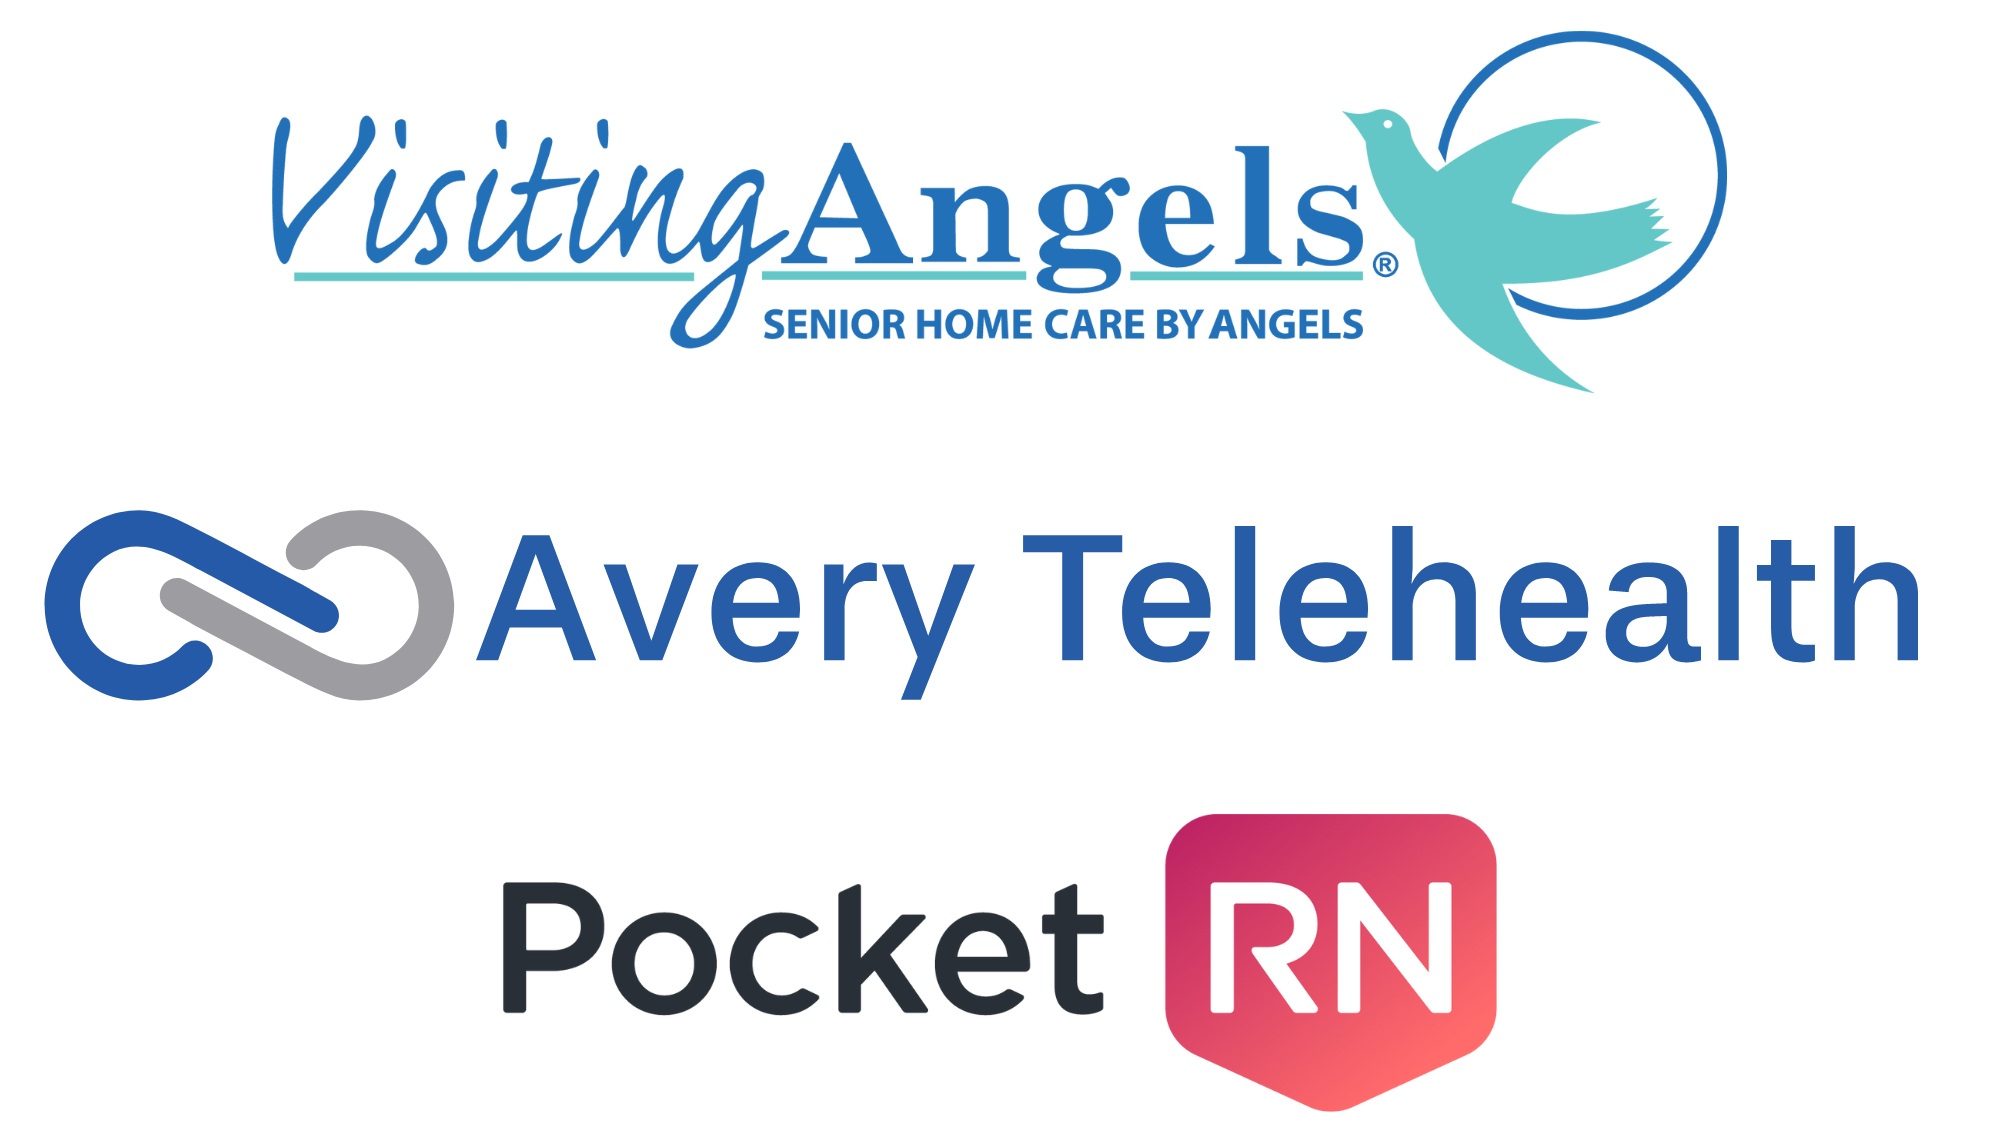 News: Visiting Angels Scottsdale Announces Partnership with Avery Telehealth and PocketRN